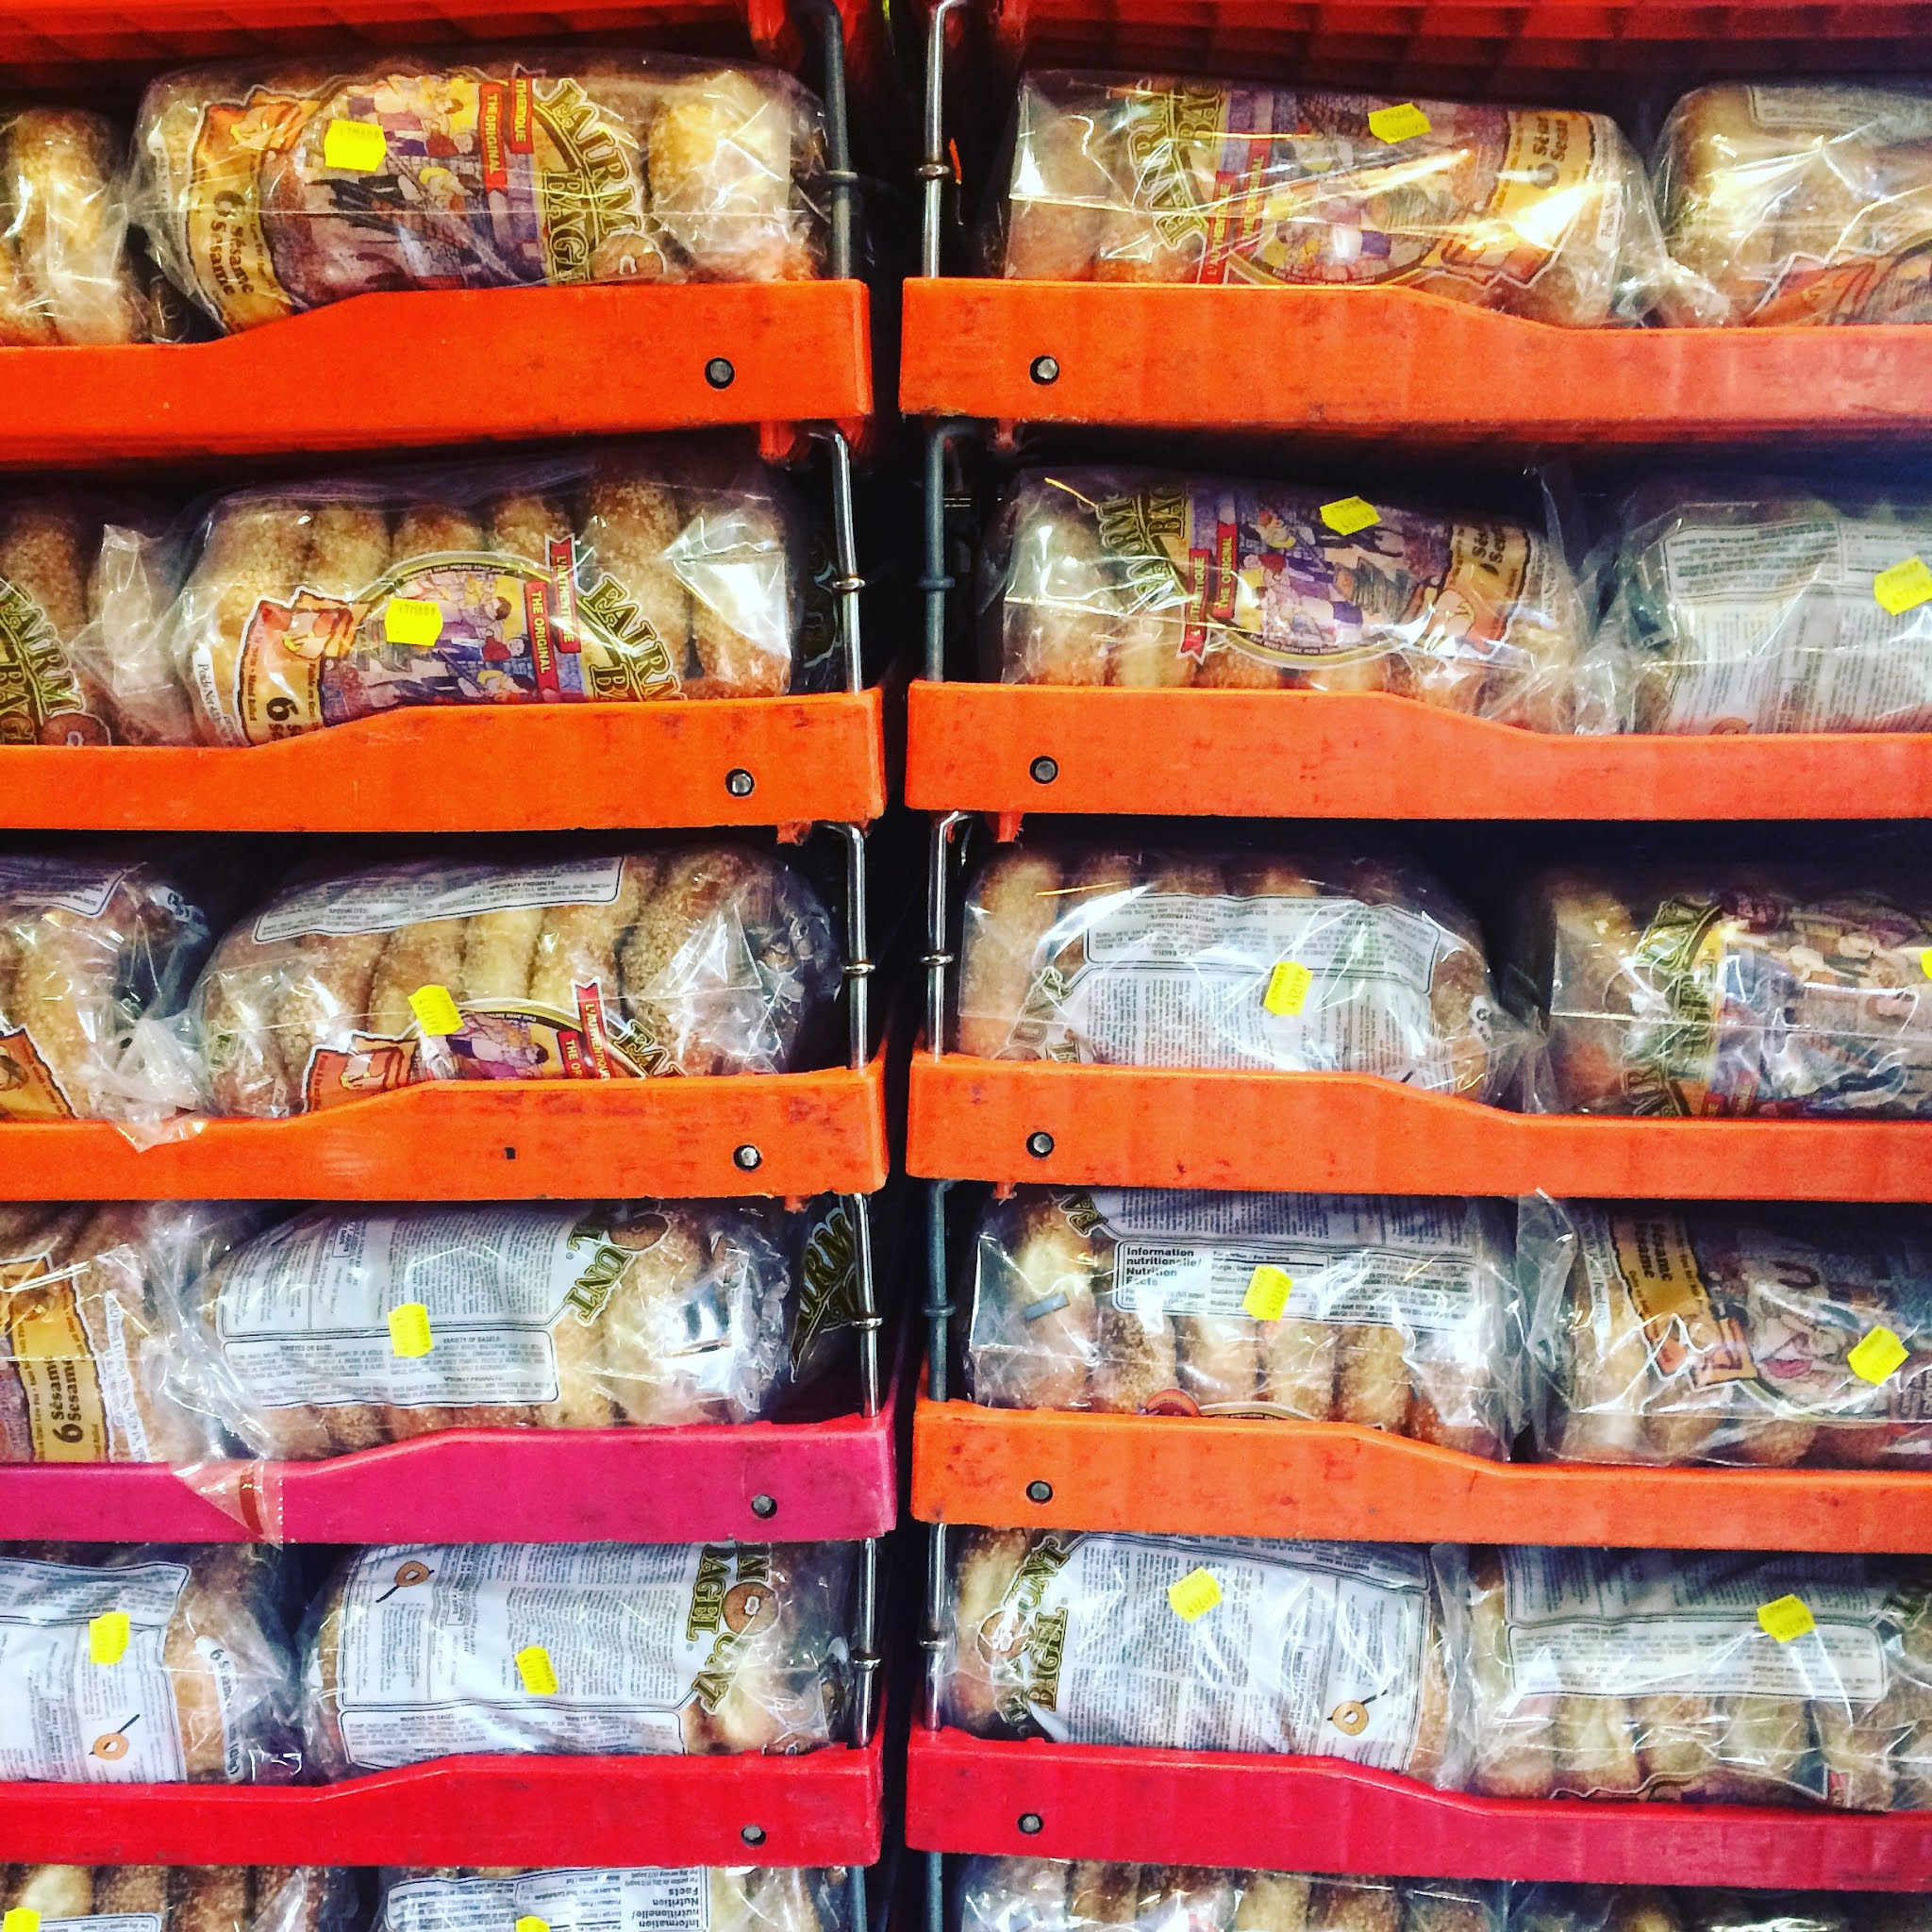 stacks of fairmont bagels in montreal